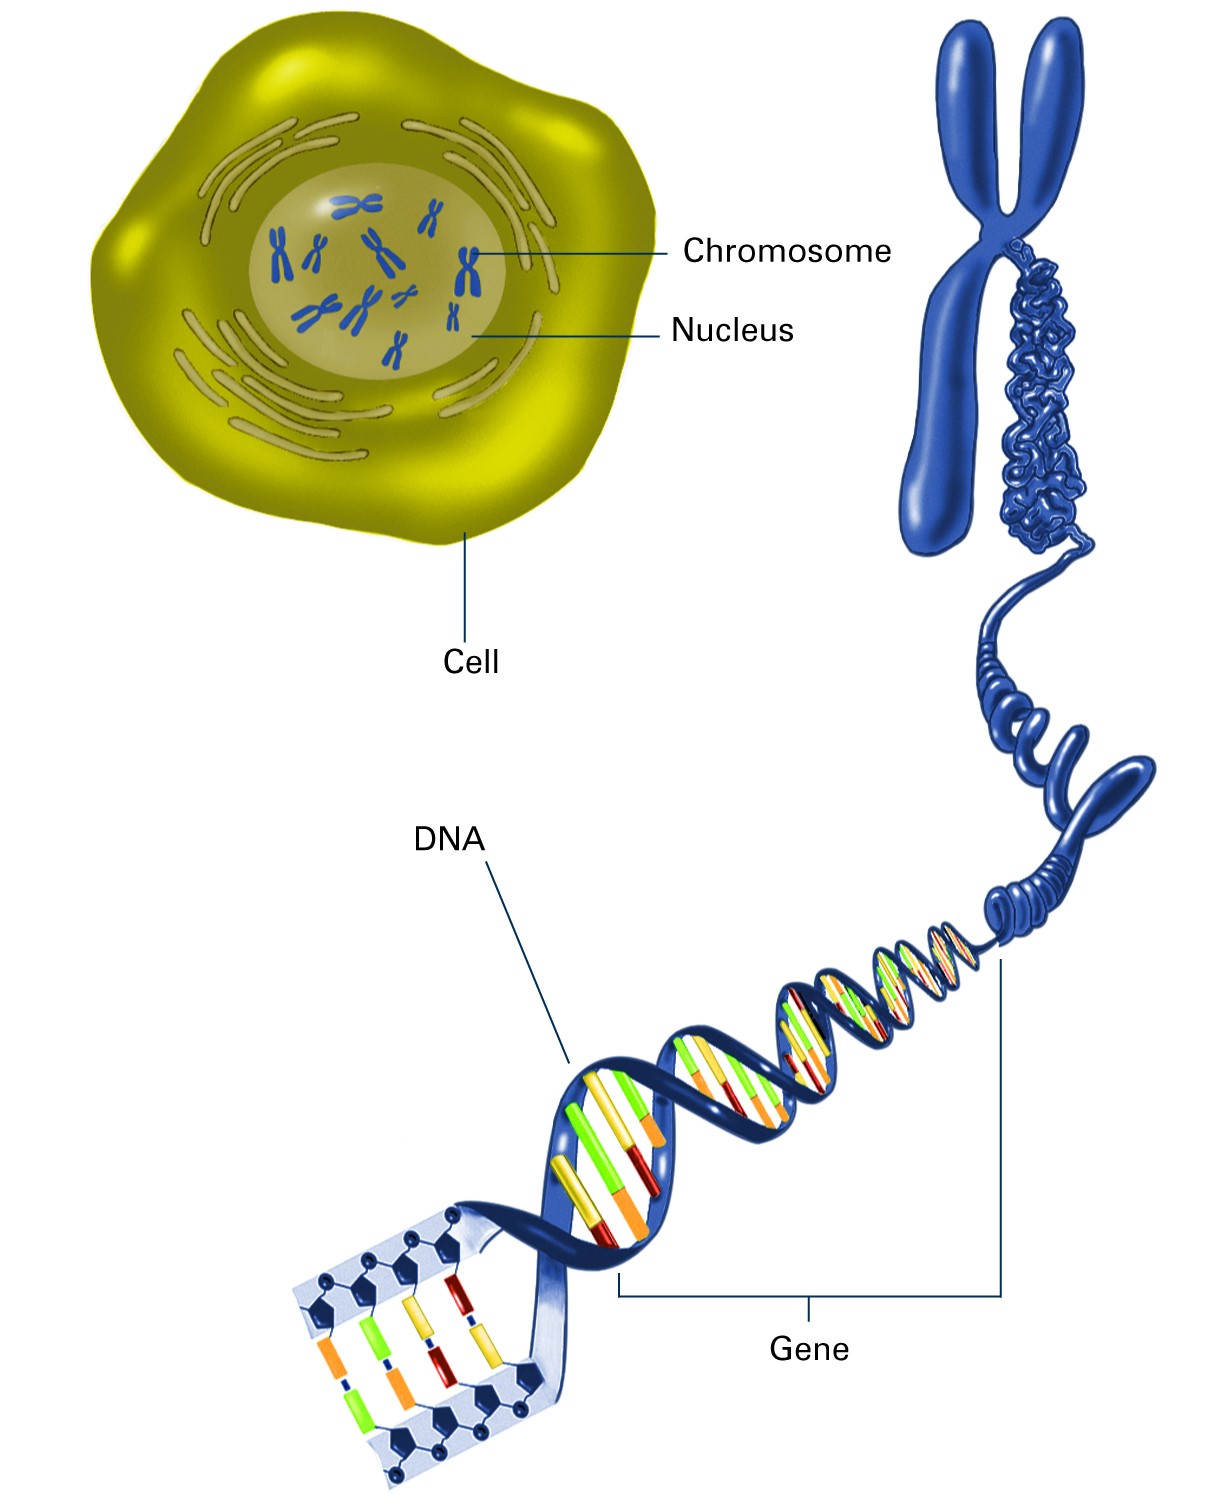 An illustration of DNA, containing genes, being folded into a chromosome. It also shows a cell with chromosomes inside the nucleus.